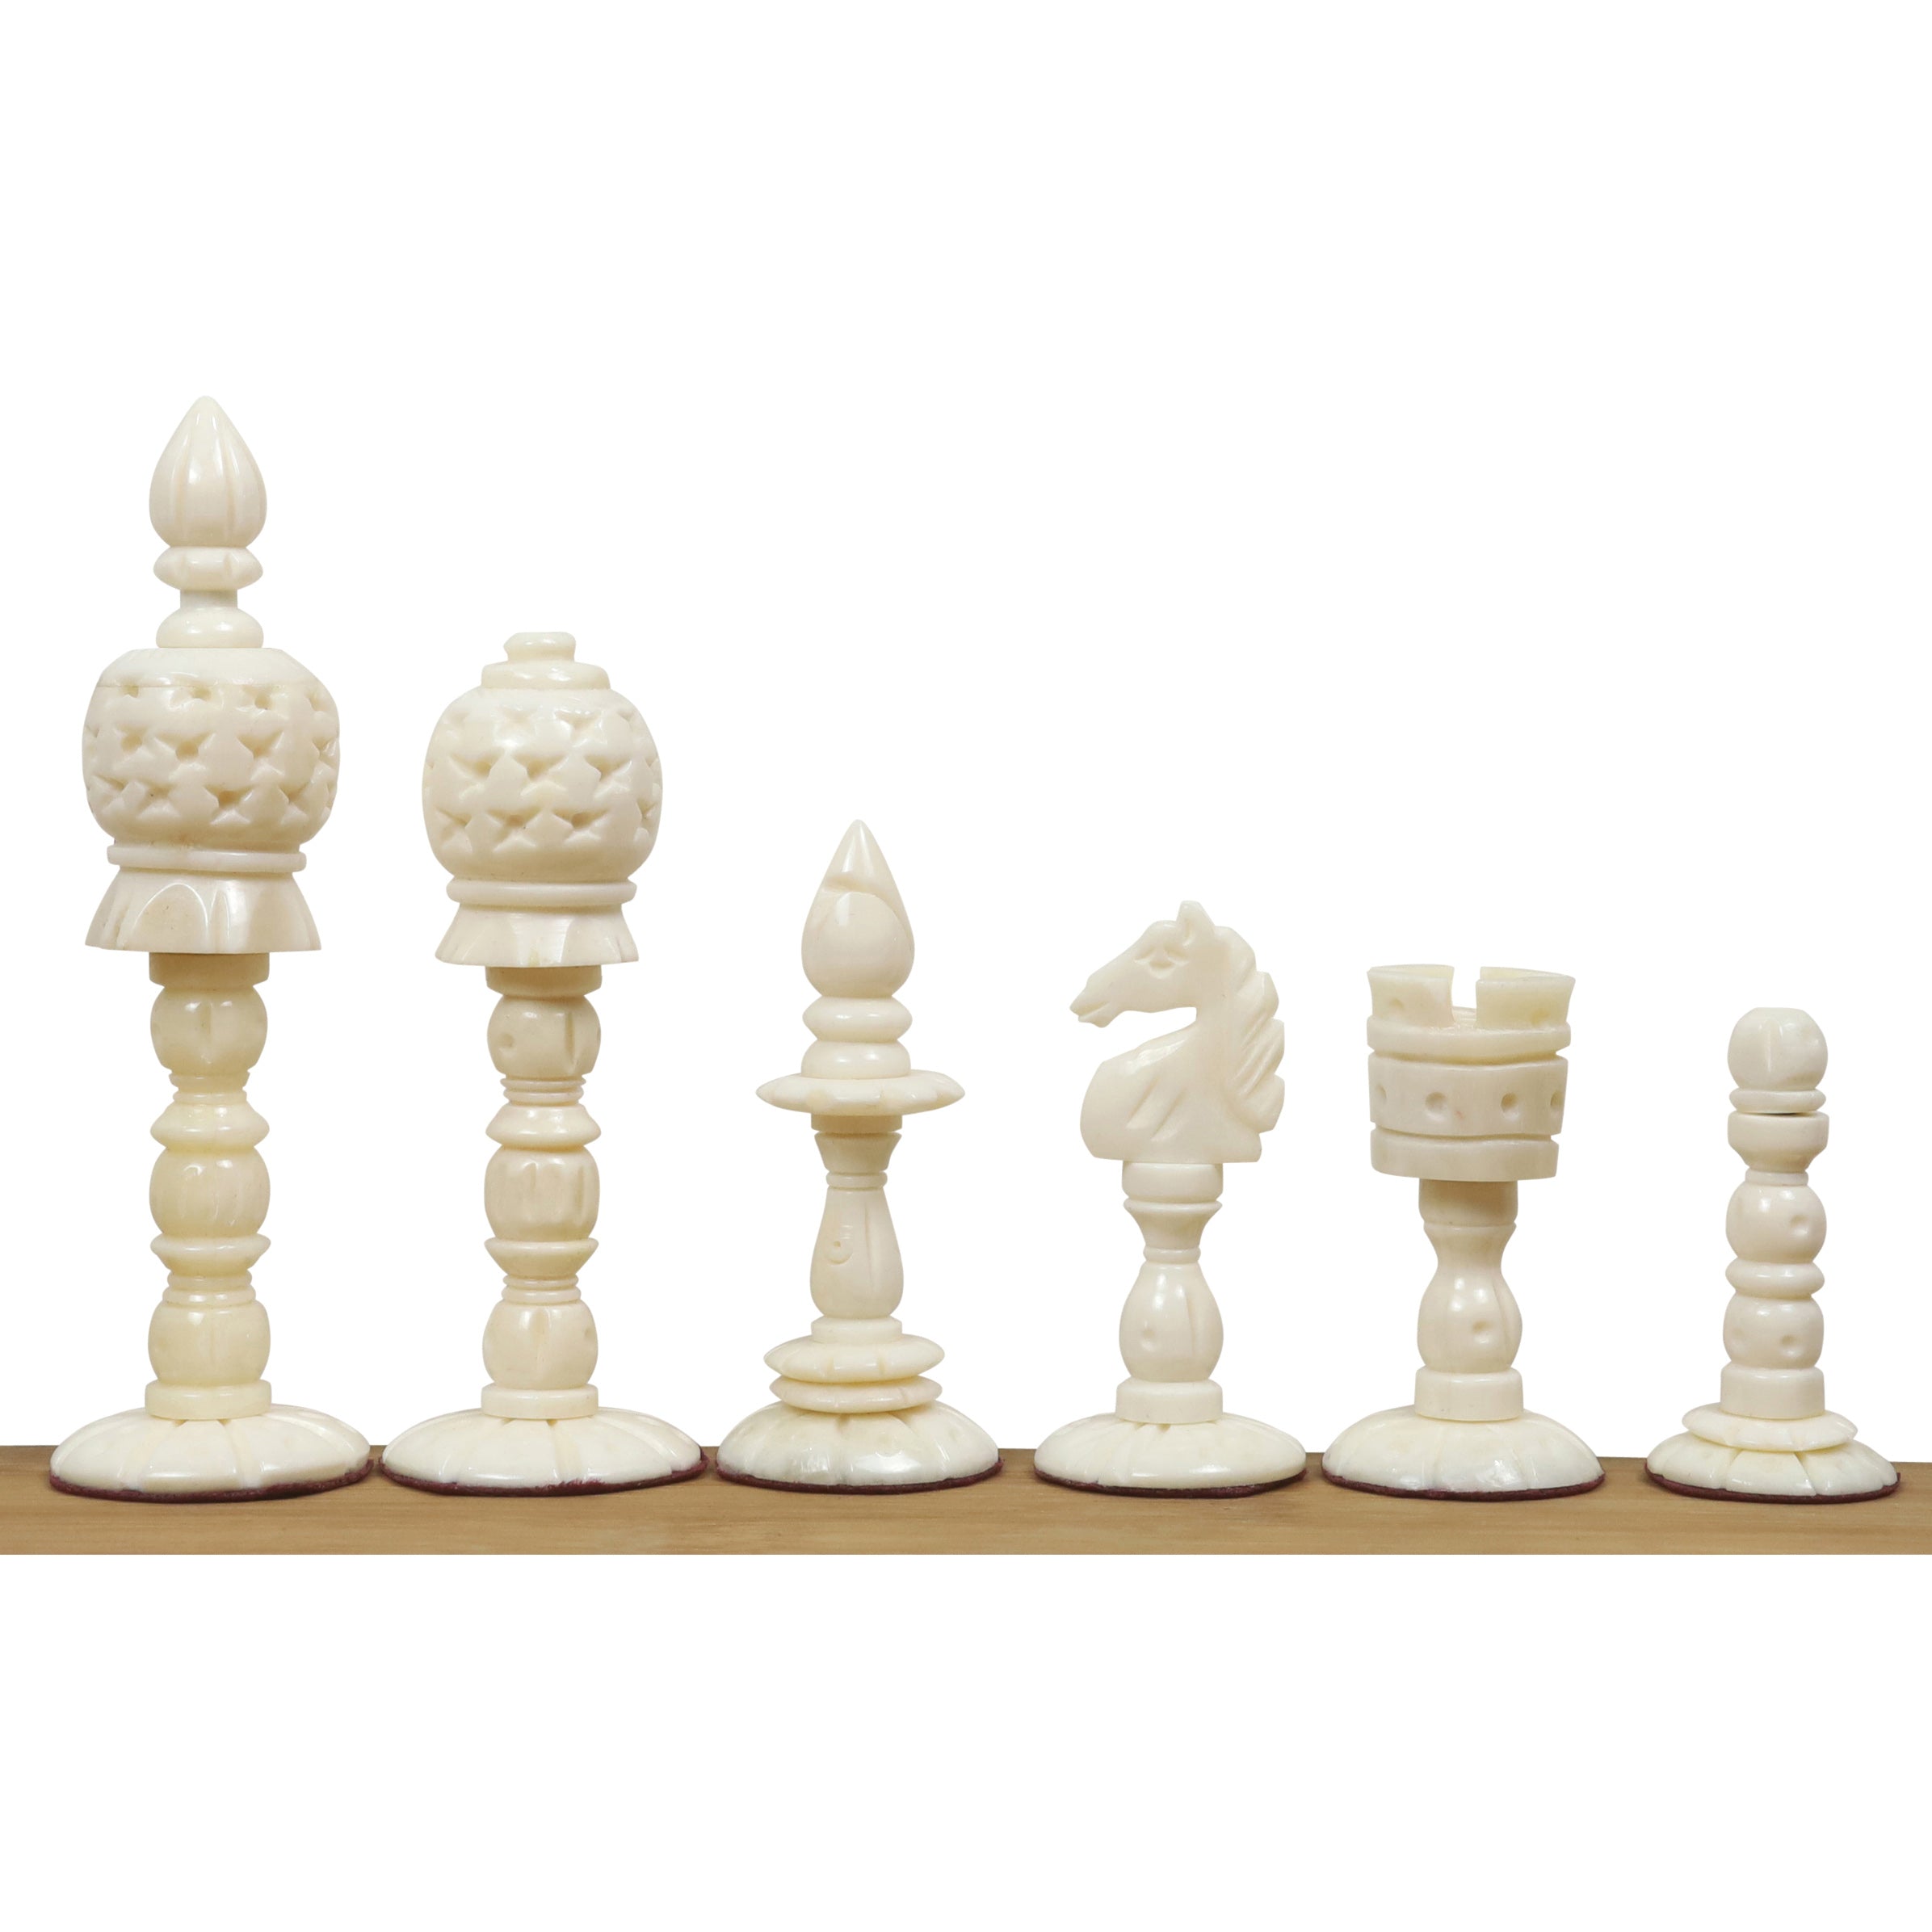 Tournament Chess Set - Extra Large & Heavy 4 Luxury Chess Pieces (  Ivory/Black) with Green/White Roll-up Chess Board